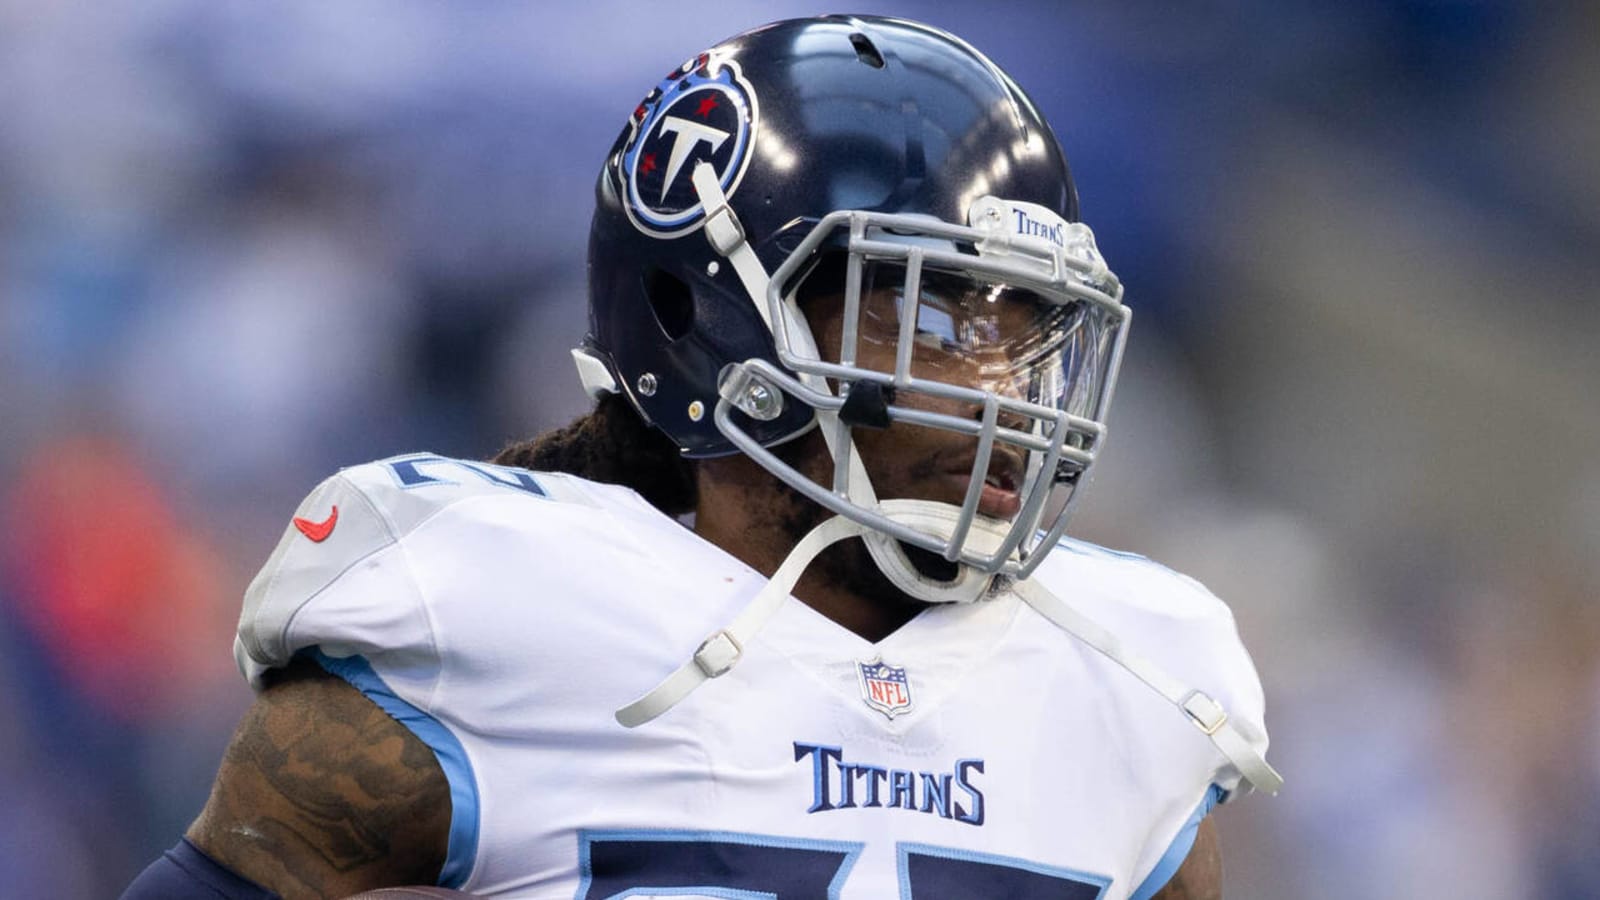 Foot injury, early playoff exit motivating Derrick Henry in 2022